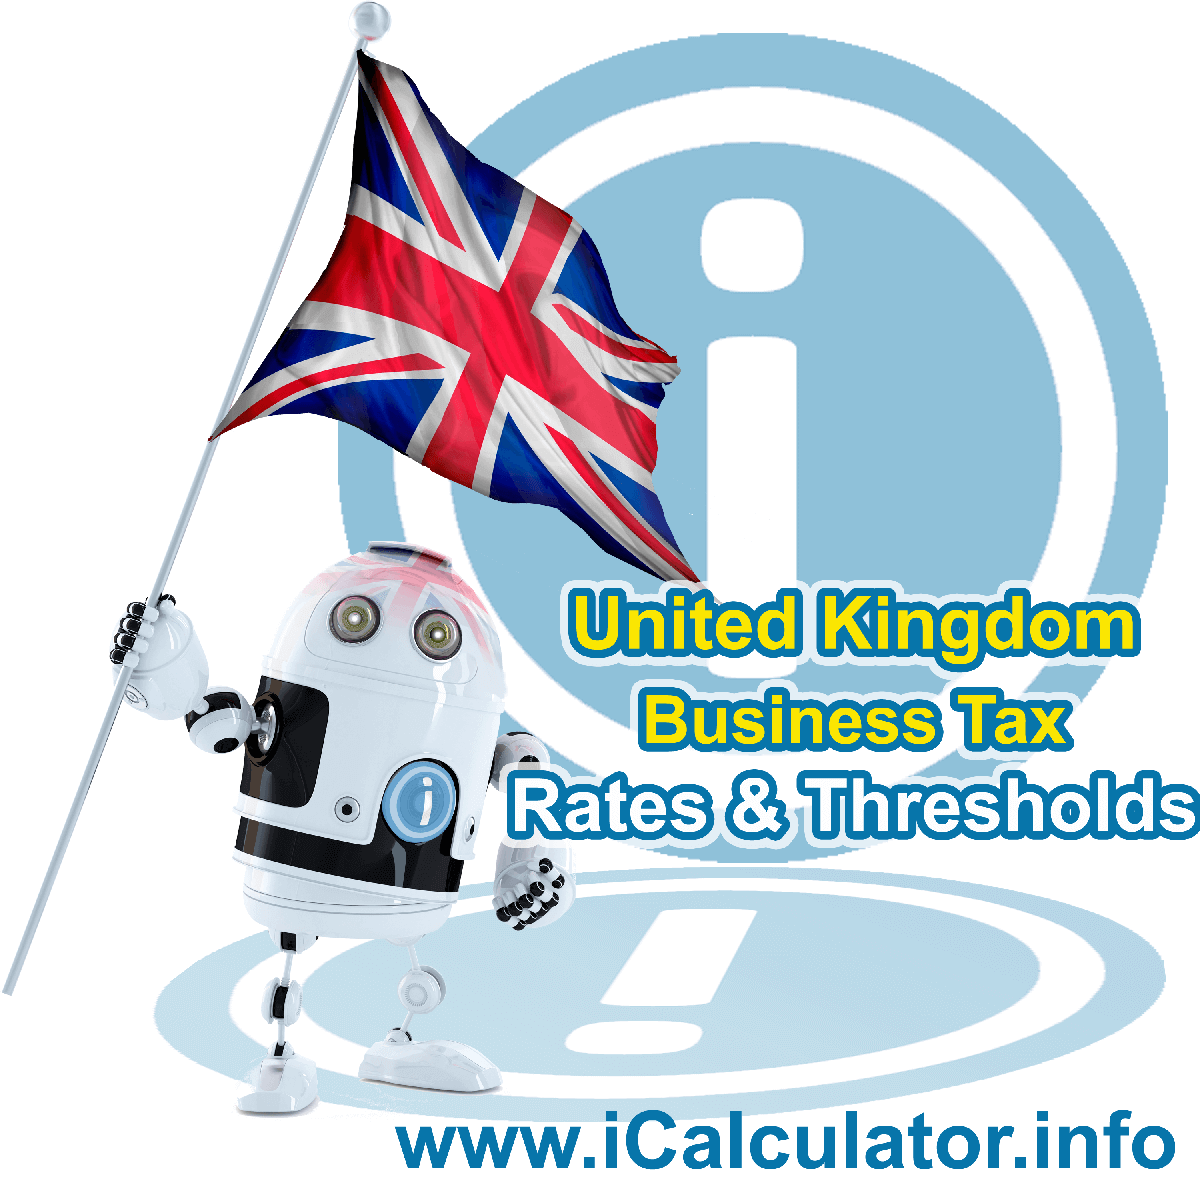 United Kingdom Corporation Tax Rates in 2010. This image shows the United Kingdom flag and information relating to the corporation tax formula for the United Kingdom Corporation Tax Calculator in 2010